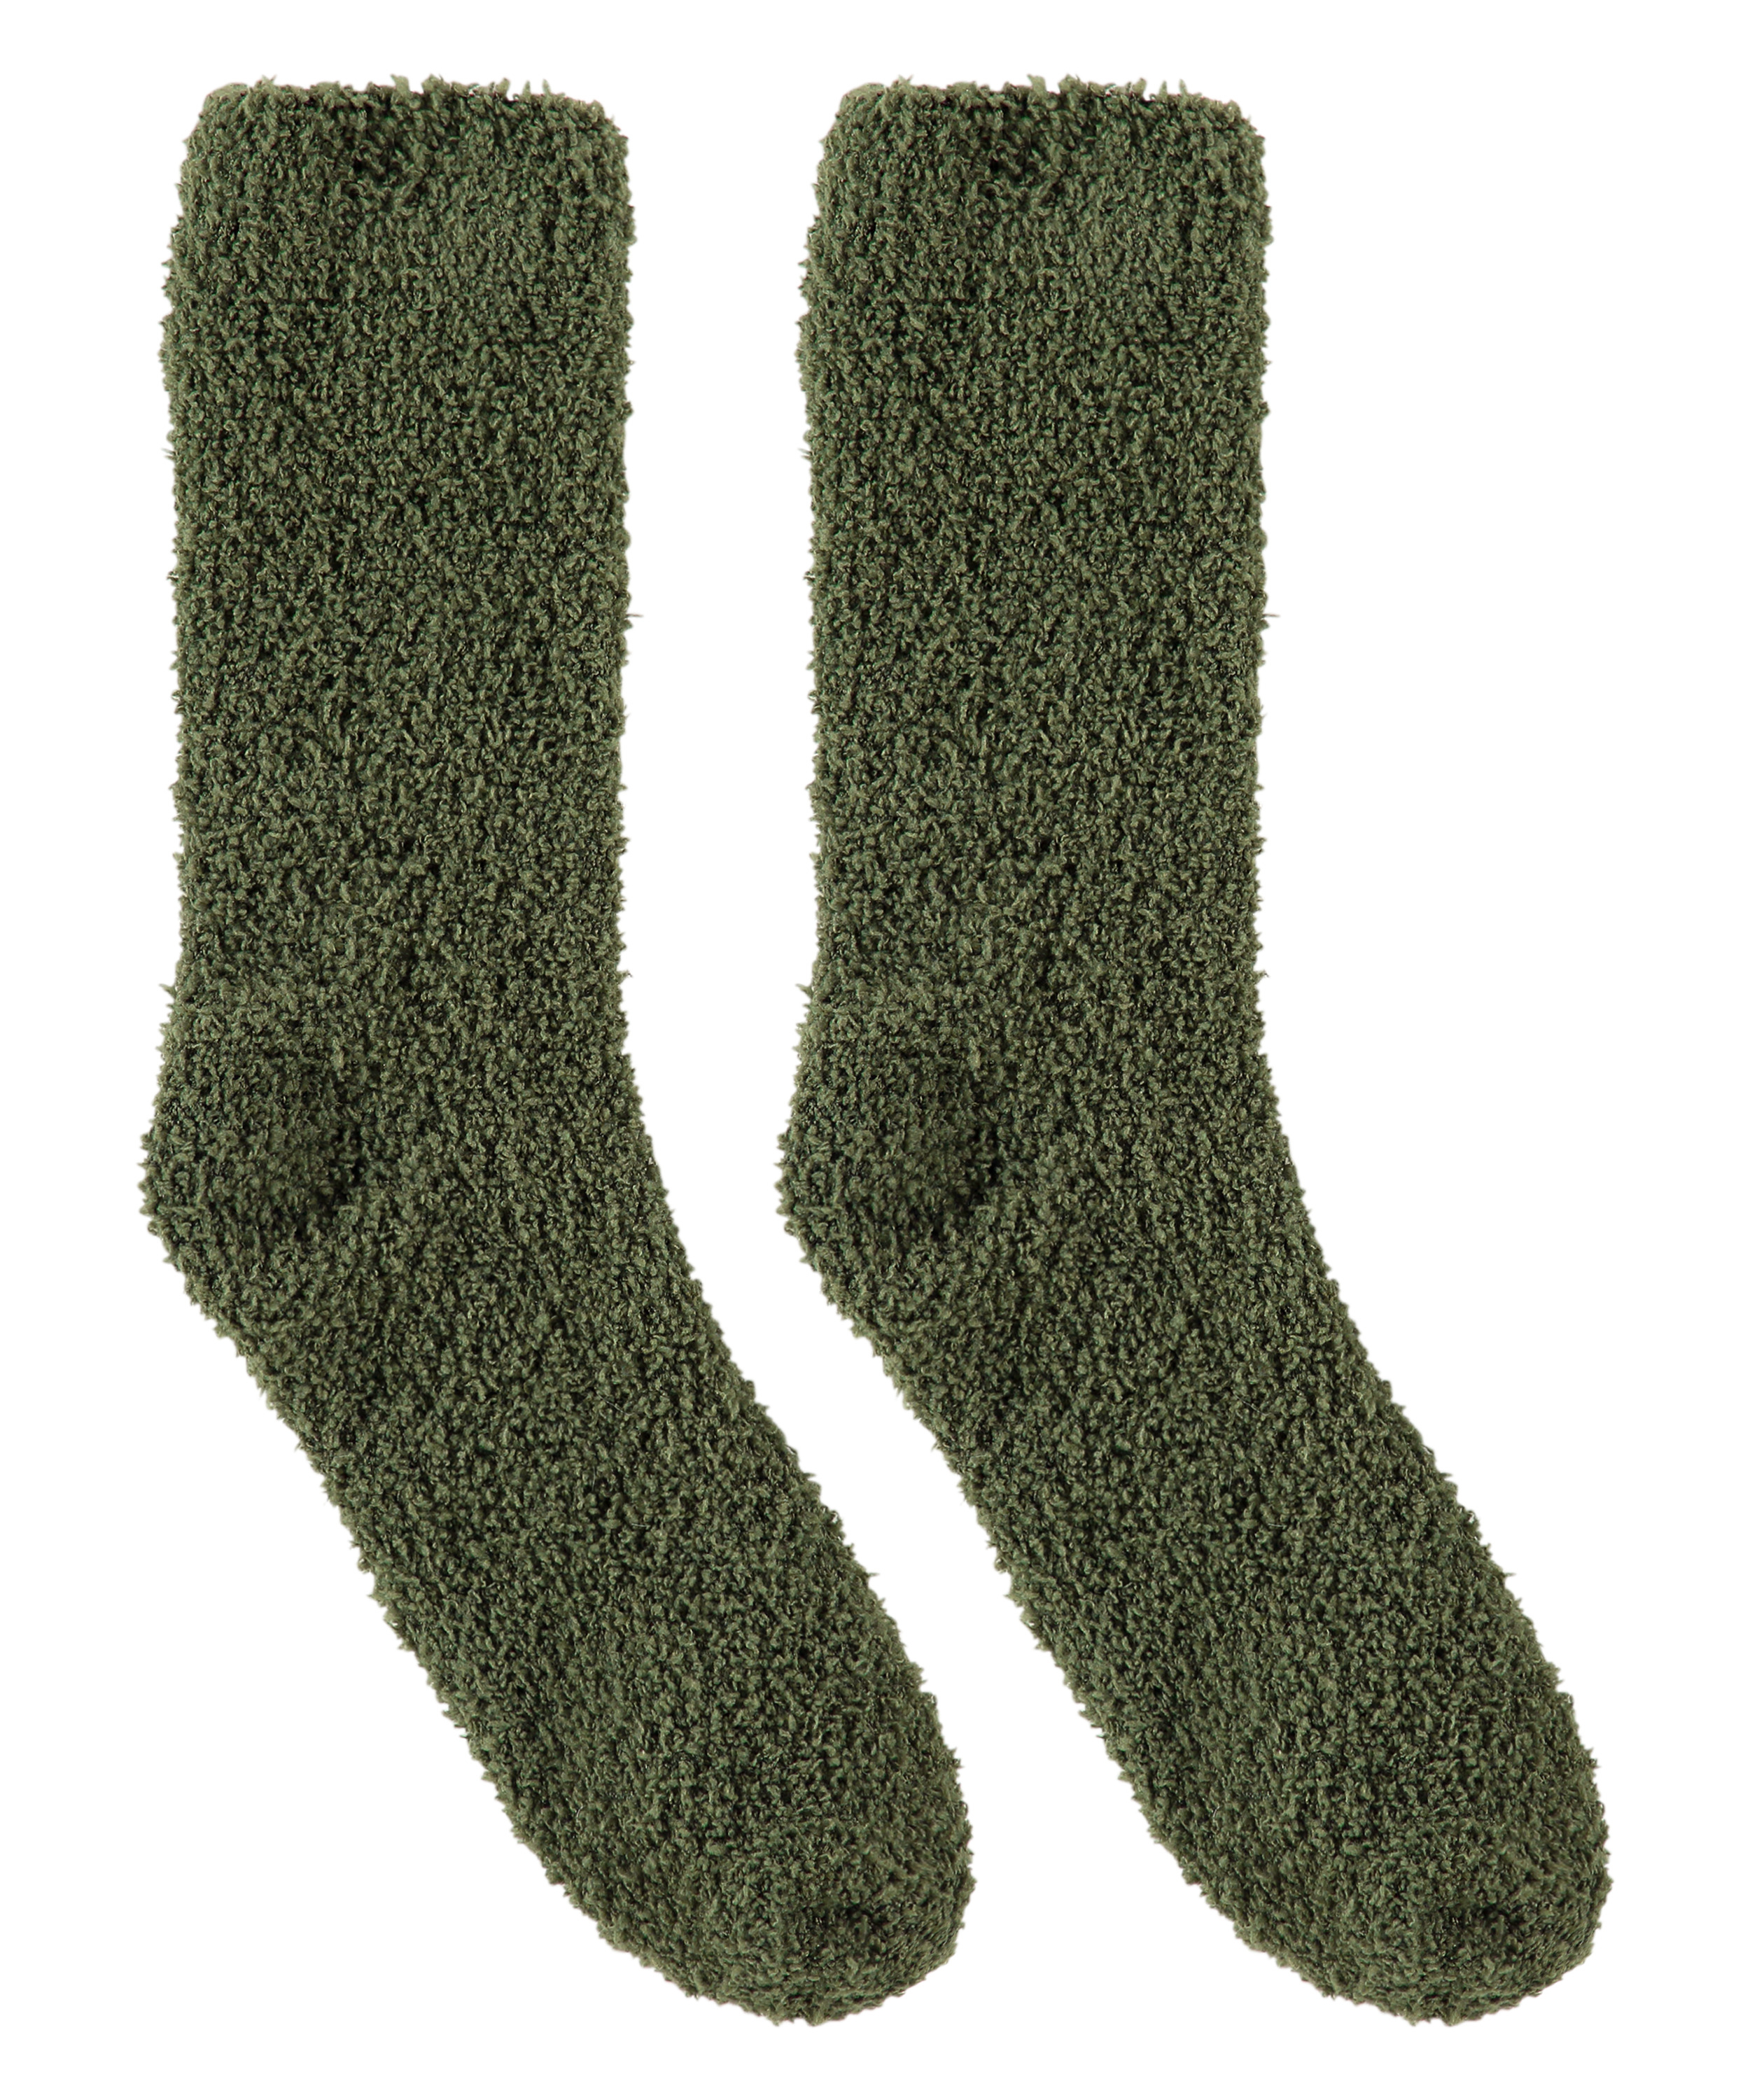 Calcetines Fluffy, Verde, main